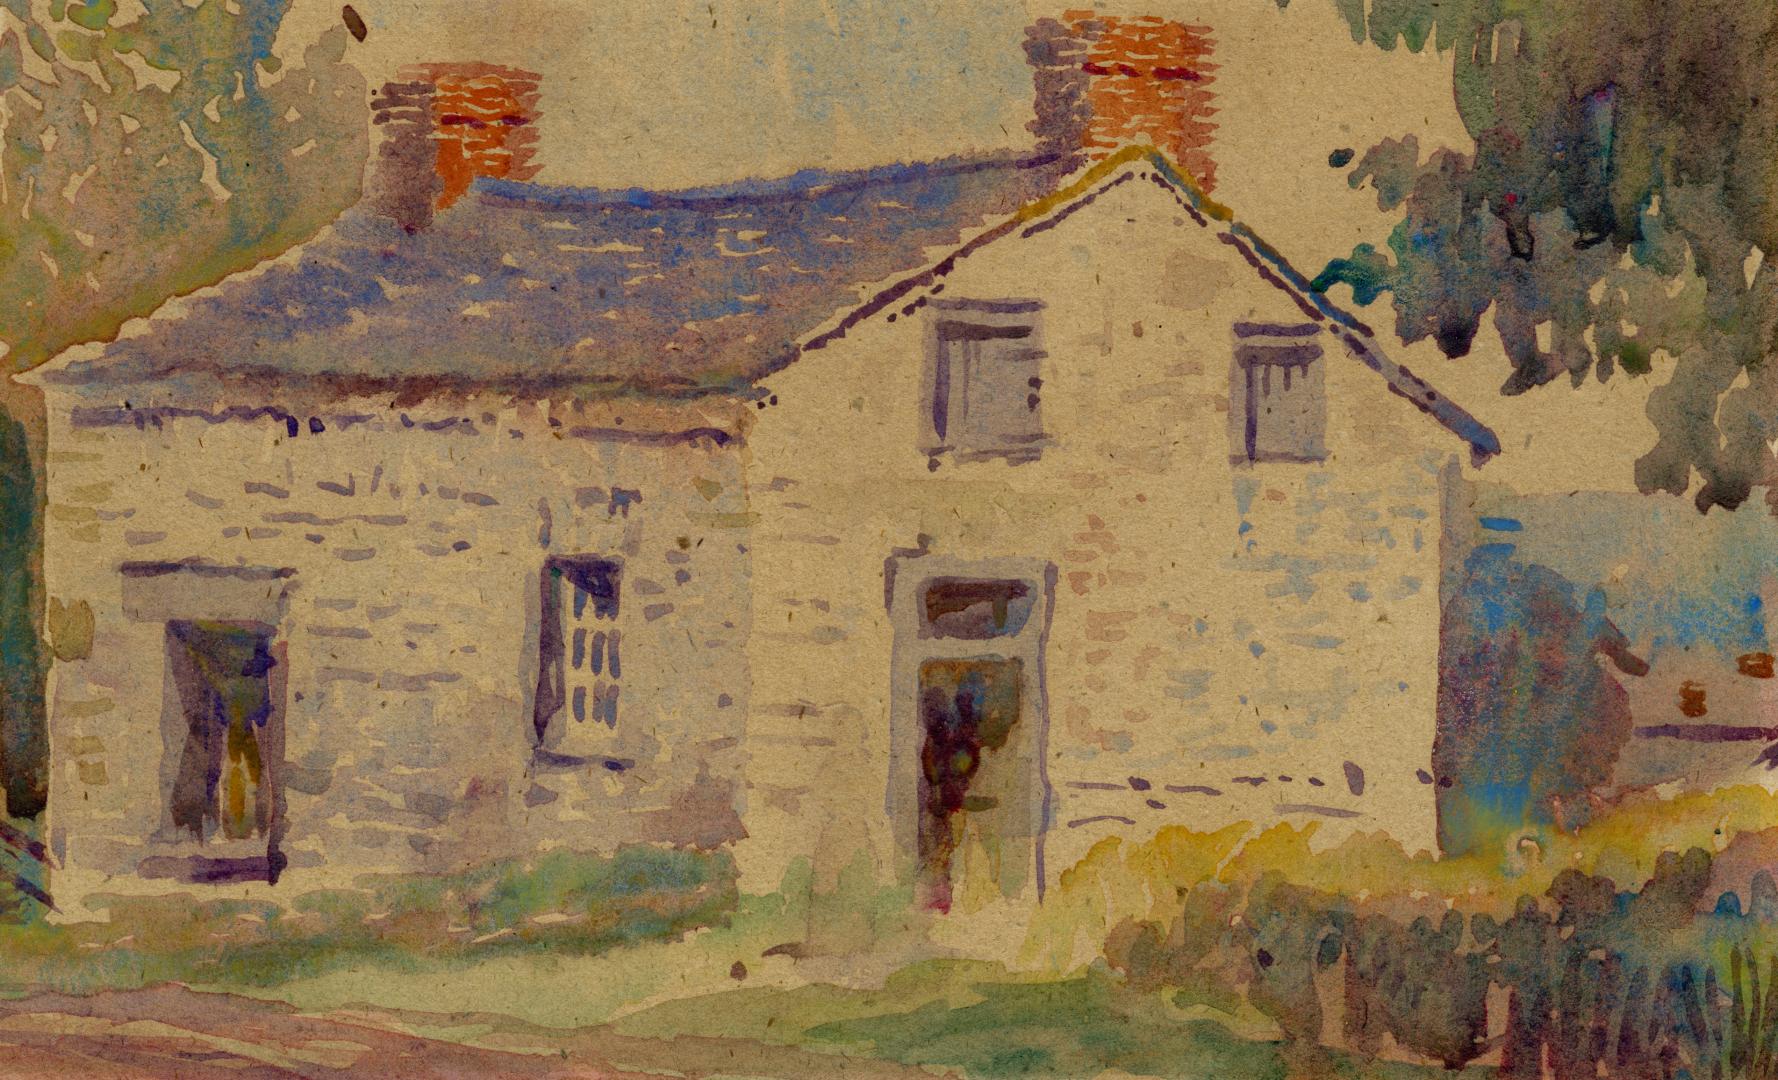 The Stone House at Queenston Where General Brock Died, As It Appeared in 1913 Niagara-on-the-Lake, Ontario)